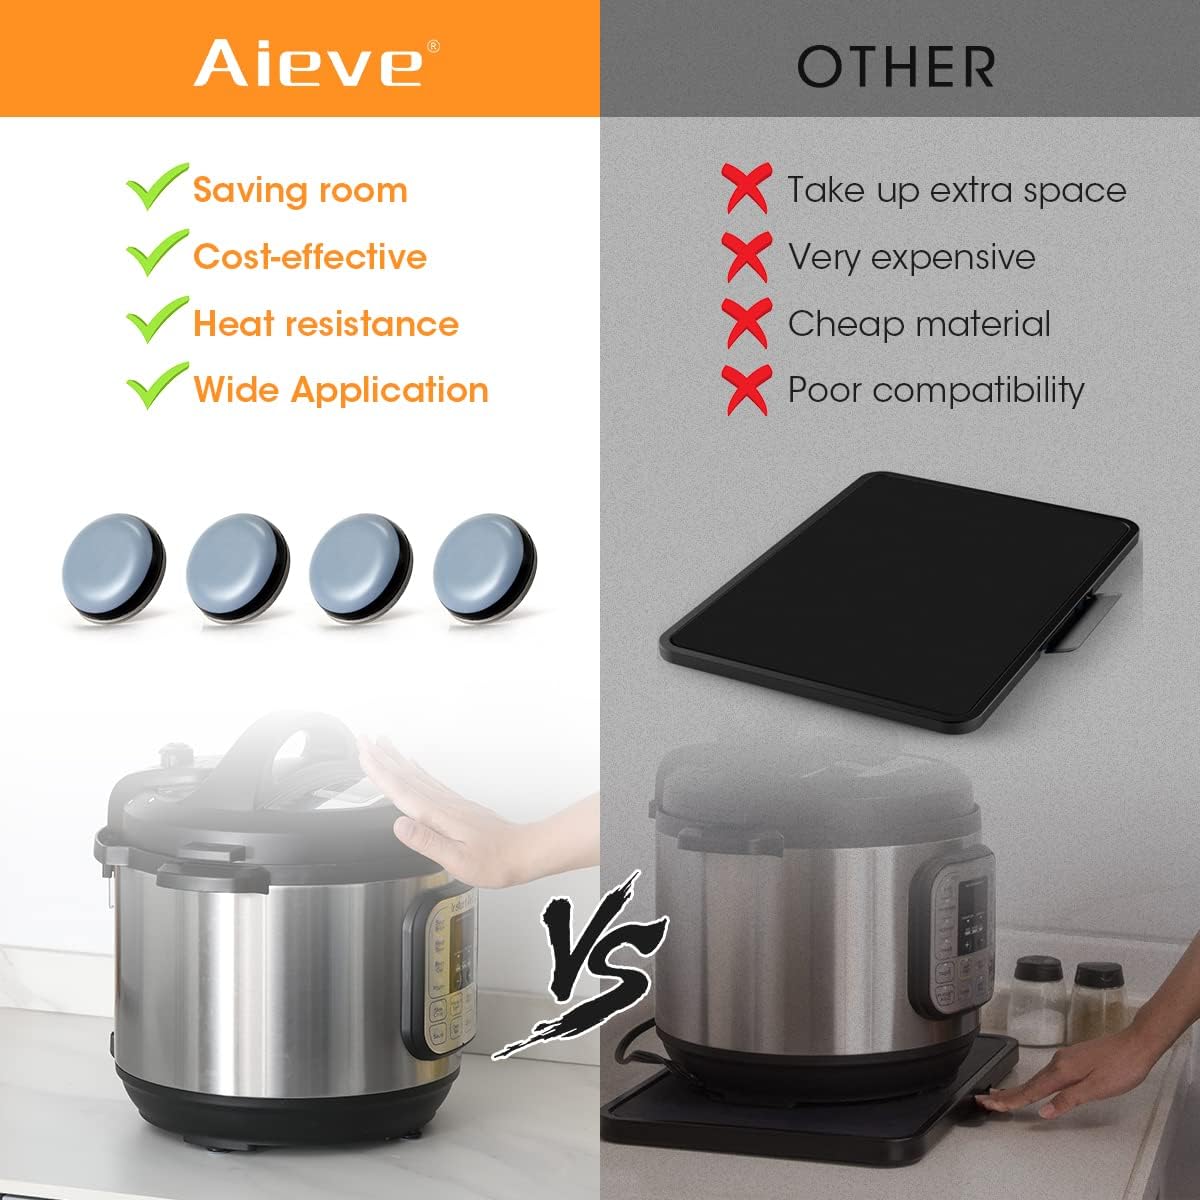 Aieve Appliance Slider, Appliance Sliders for Kitchen Appliances, Small Appliance Slider for Most Countertop